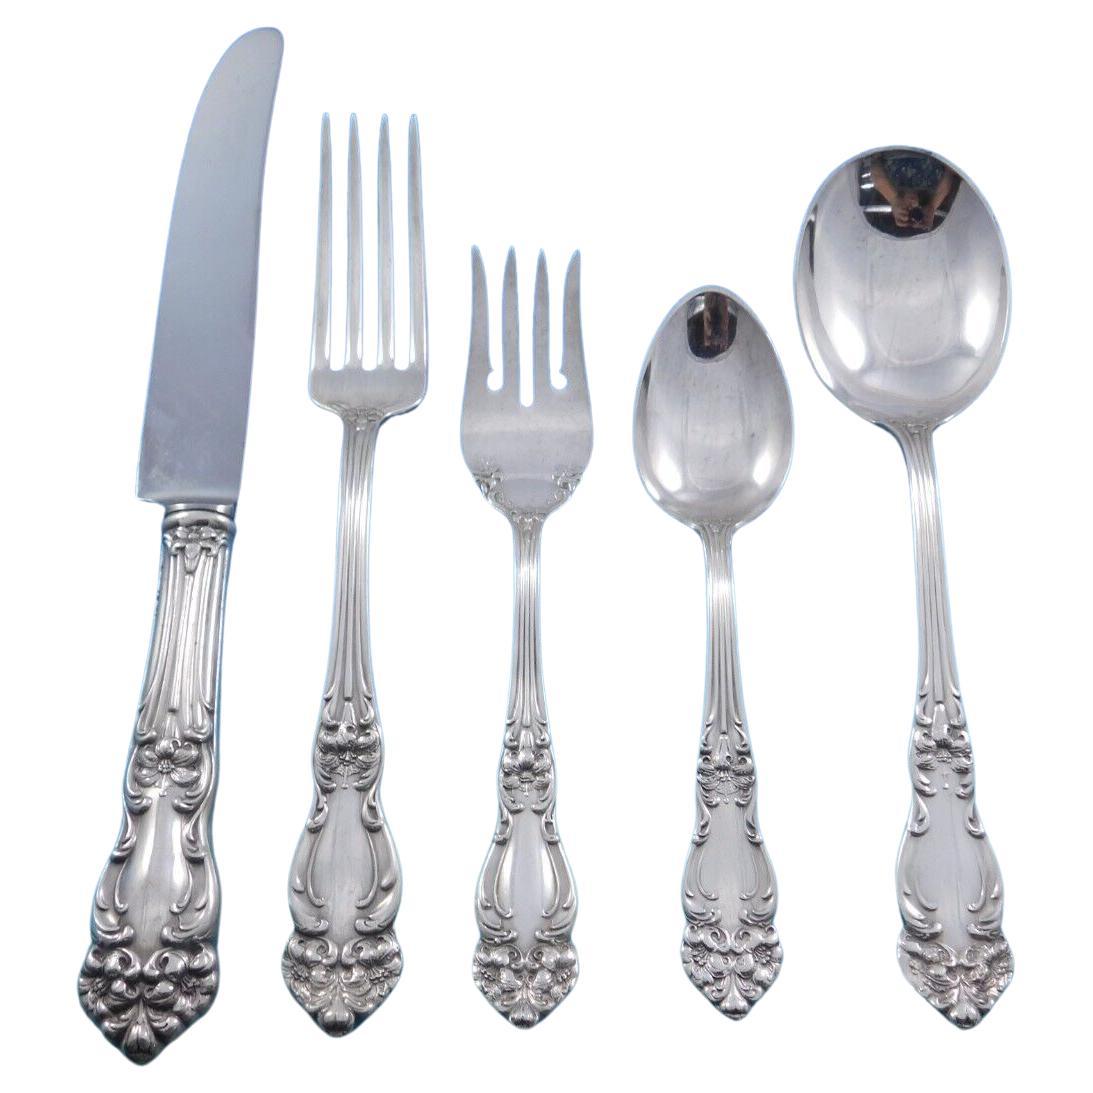 Amaryllis by Reed & Barton Sterling Silver Flatware Set 8 Service 43 pcs Dinner